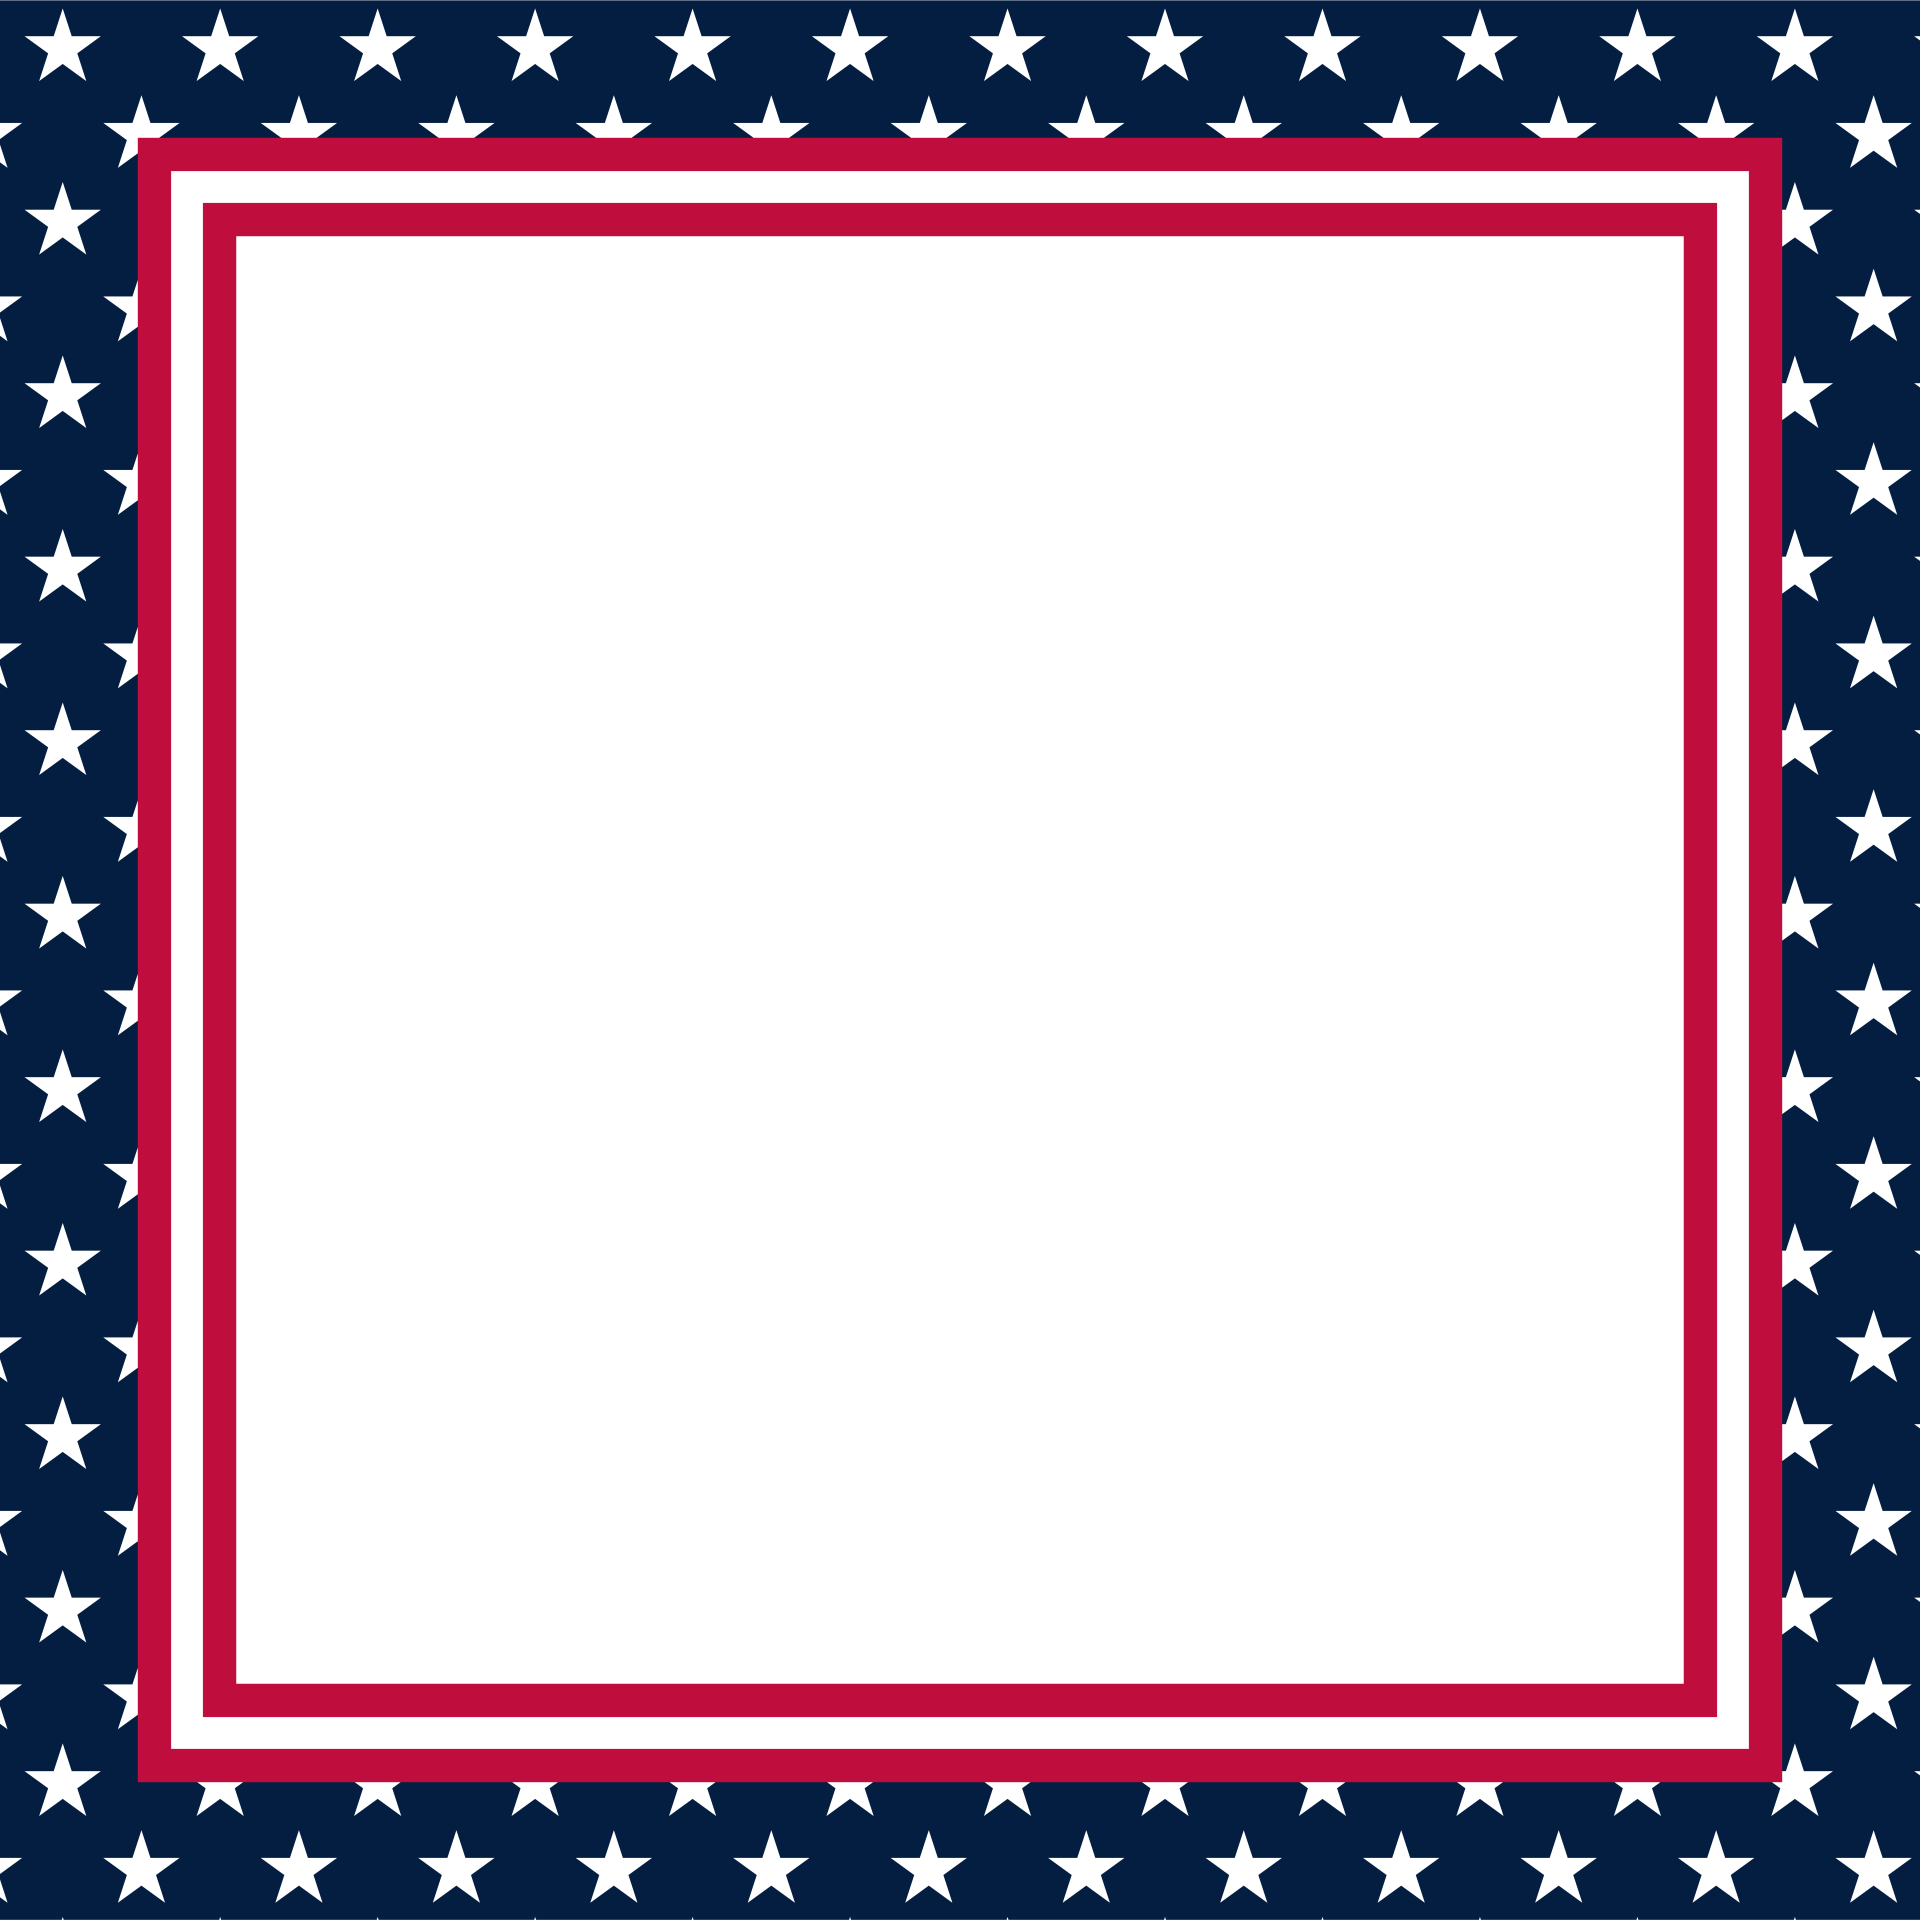 A frame made out of a flag of the United States of America